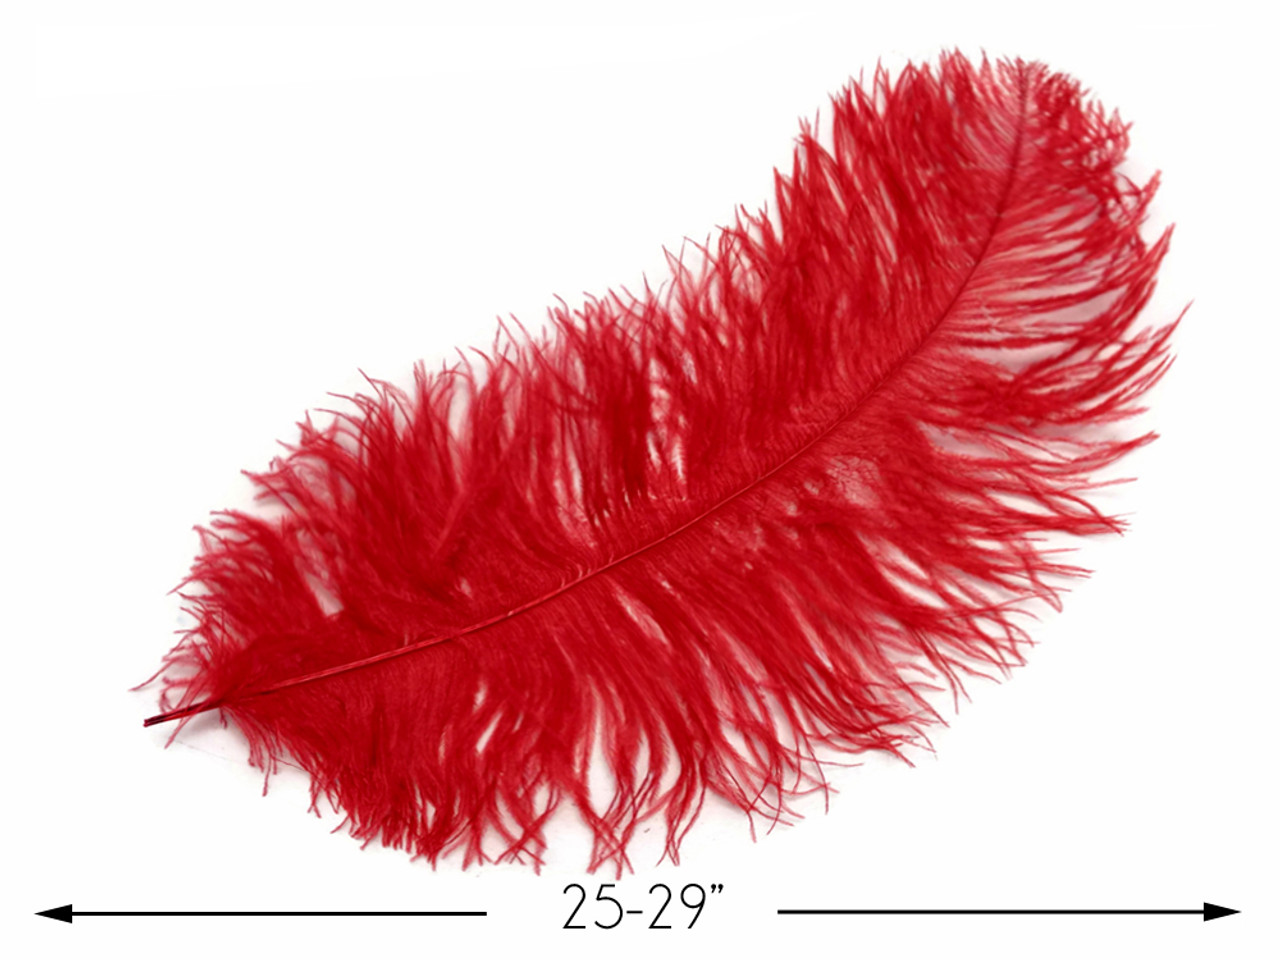 1/2 Lb. - 25-29 Red Large Ostrich Wing Plume Wholesale Feathers (Bulk)